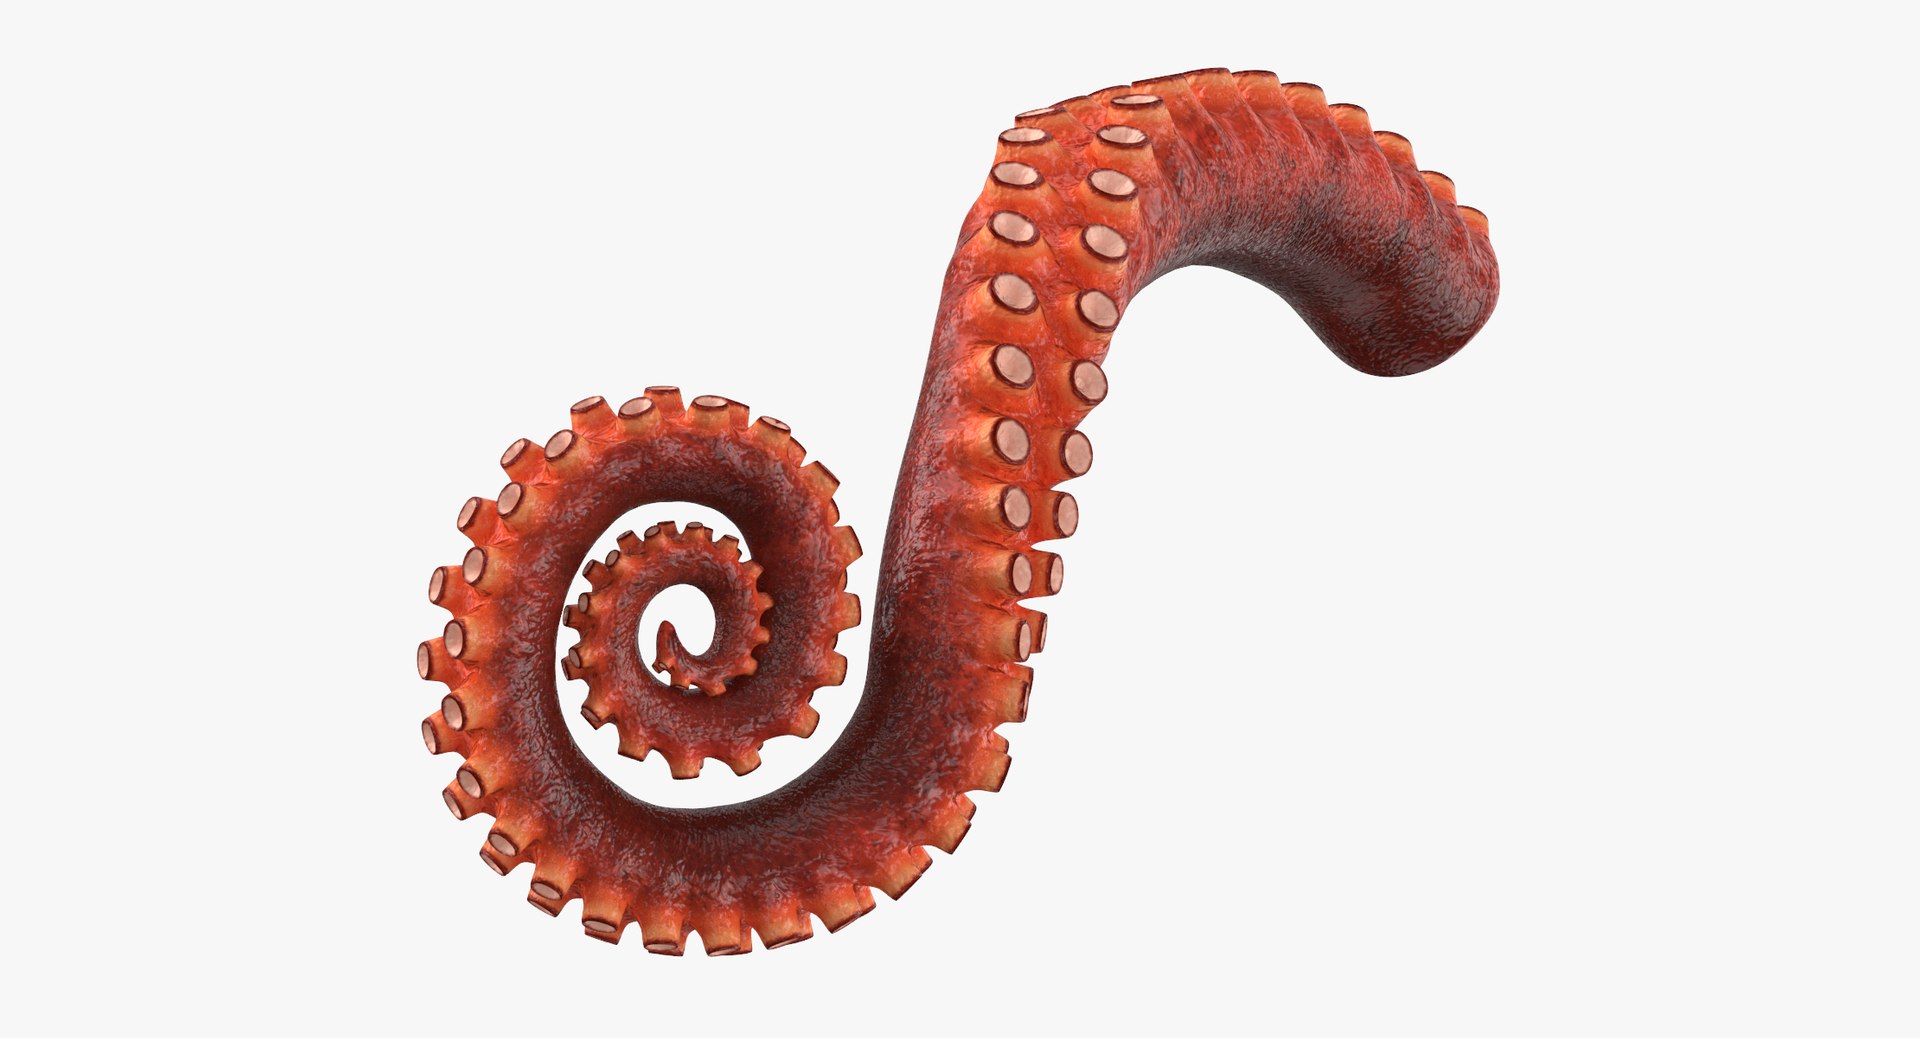 Octopus Tentacle Rigged 3d Model